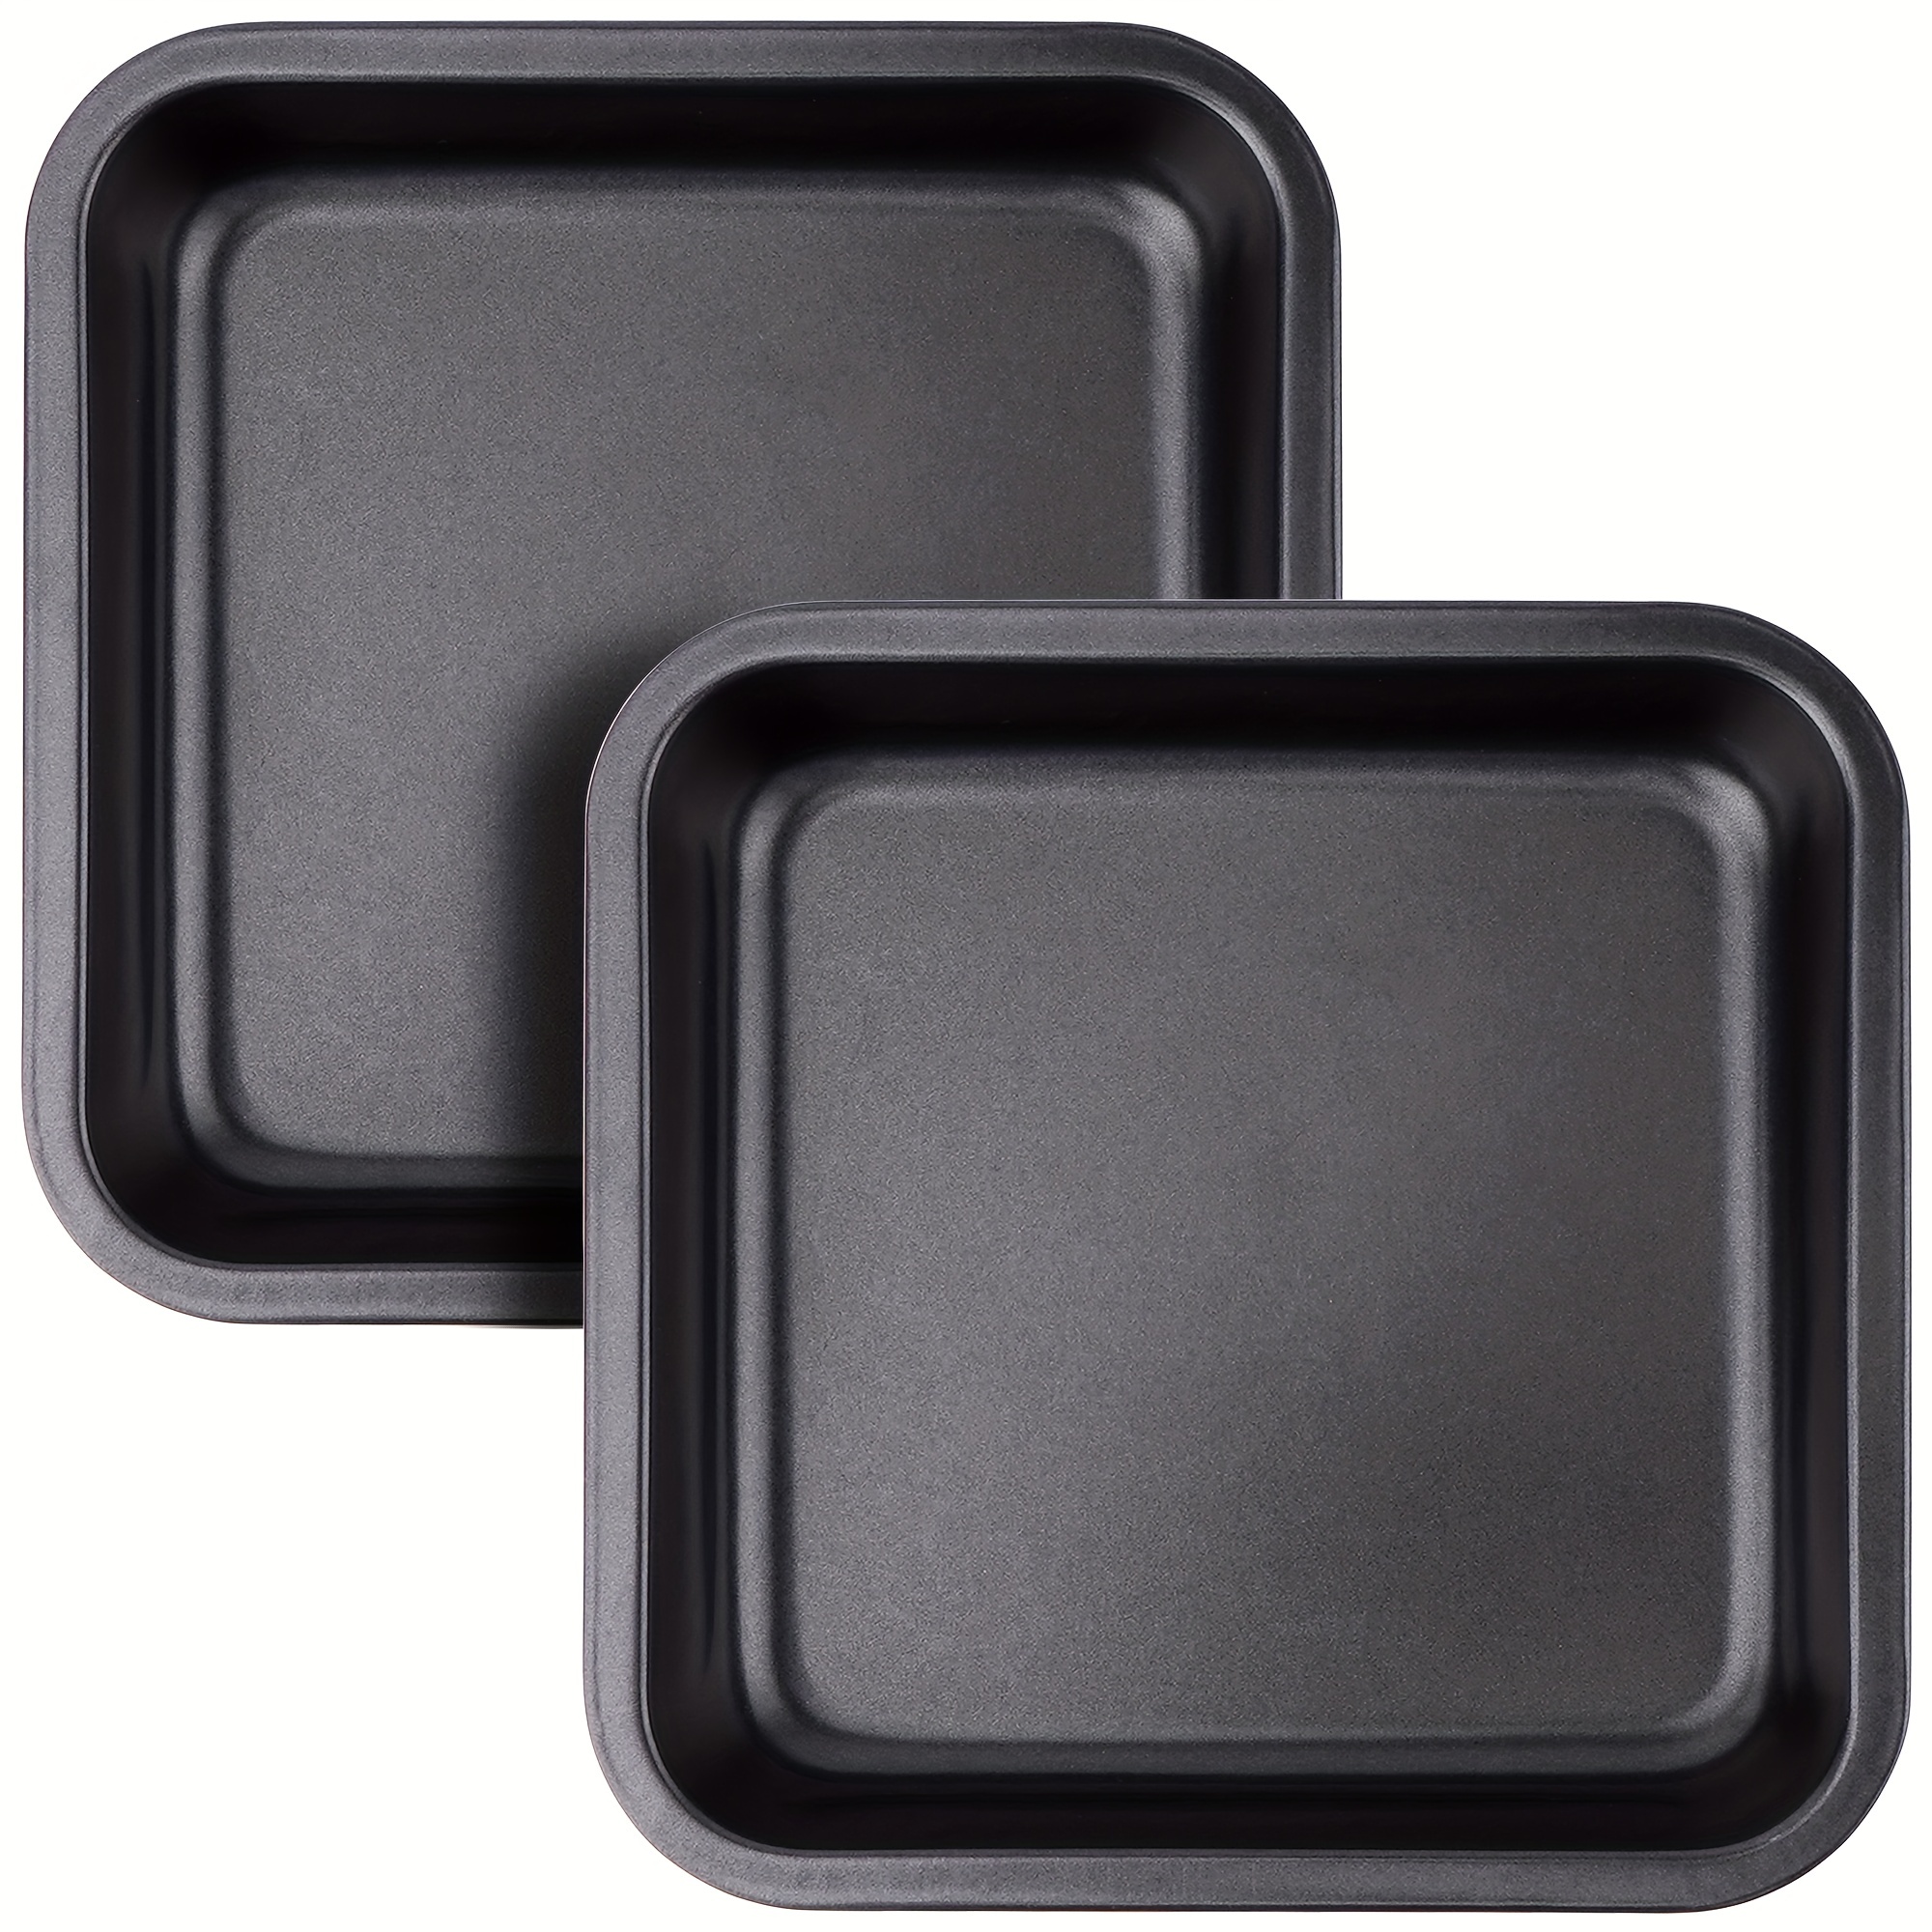 Thicken Carbon Steel Golden Baking Tray Nonstick Square Oven Cake